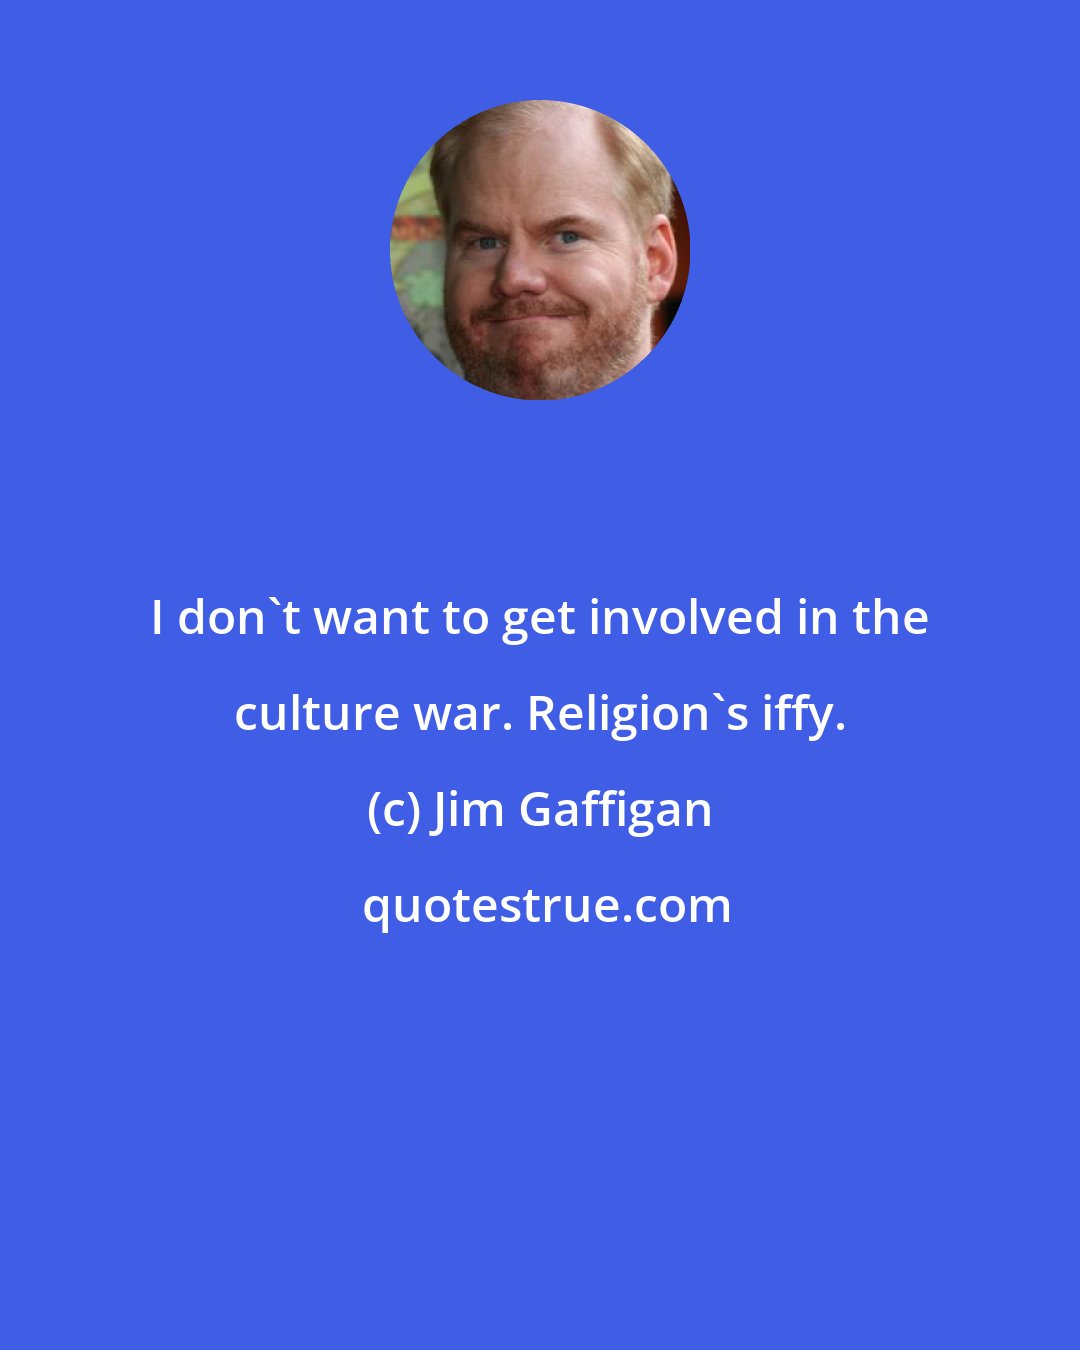 Jim Gaffigan: I don't want to get involved in the culture war. Religion's iffy.